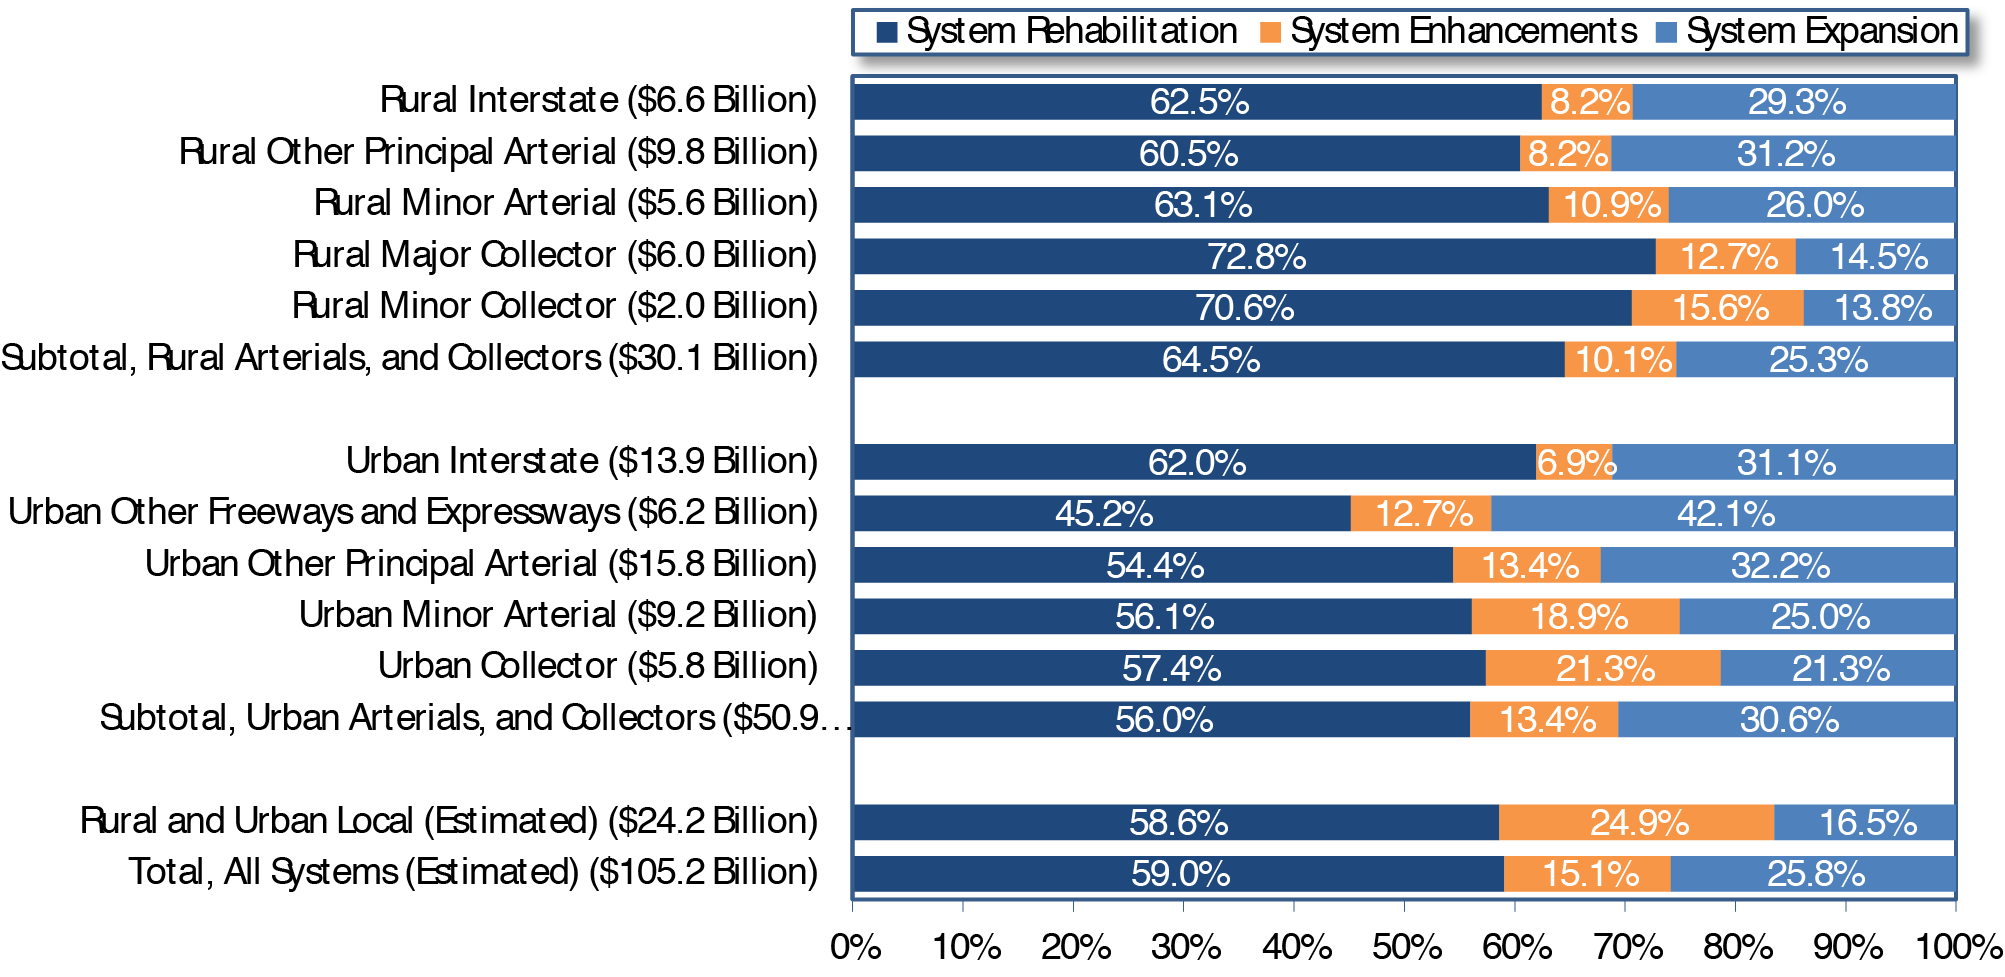 Horizontal bar chart plots distribution of capital in percentage across three types of improvement for rural and urban systems. For rural arterials and collectors, the distribution of capital outlay in the amount of 30.1 billion dollars is 64.5 percent for system rehabilitation, 10.1 percent for system enhancements, and 25.3 percent for system expansion. Comparing the ranges in the breakdown according to component, the system rehabilitation share of other principal arterial with an outlay of 9.8 billion dollars is 60.5 percent (low value), while the share of rural major collector with an outlay of 6 billion dollars is 72.8 percent (high value). The system enhancement share of rural interstate with an outlay of 6.6 billion dollars is 8.2 percent (low value), while the share of rural minor collector with an outlay of 2 billion dollars is 15.6 percent (high value). The system expansion share of rural minor collector with an outlay of 2 billion dollars is 13.8 percent (low value), while the share of other principal arterial with an outlay of 9.8 billion dollars is 31.2 percent (high value). For urban arterials and collectors, the distribution of capital outlay in the amount of 50.9 billion dollars is 56 percent for system rehabilitation, 13.4 percent for system enhancements, and 30.6 percent for system expansion. Comparing the ranges in the breakdown according to component, the system rehabilitation share of other freeways and expressways with an outlay of 6.2 billion dollars is 45.2 percent (low value), while the share of urban interstate with an outlay of 13.9 billion dollars is 62 percent (high value). The system enhancement share of urban interstate with an outlay of 13.9 billion dollars is 6.9 percent (low value), while the share of urban collector with an outlay of 5.8 billion dollars is 21.3 percent (high value). The system expansion share of urban collector with an outlay of 5.8 billion dollars is 21.3 percent (low value), while the share of other freeways and expressways with an outlay of 6.2 billion dollars is 42.1 percent (high value). For rural and urban local systems, the distribution of capital outlay in the amount of an estimated 24.2 billion dollars is 58.6 percent for system rehabilitation, 24.9 percent for system enhancements, and 16.5 percent for system expansion. For total of all systems, the distribution of capital outlay in the amount of an estimated 105.2 billion dollars is 59 percent for system rehabilitation, 15.1 percent for system enhancements, and 25.8 percent for system expansion. <em>Sources: Highway Statistics 2012, Table SF-12A, and unpublished FHWA data.